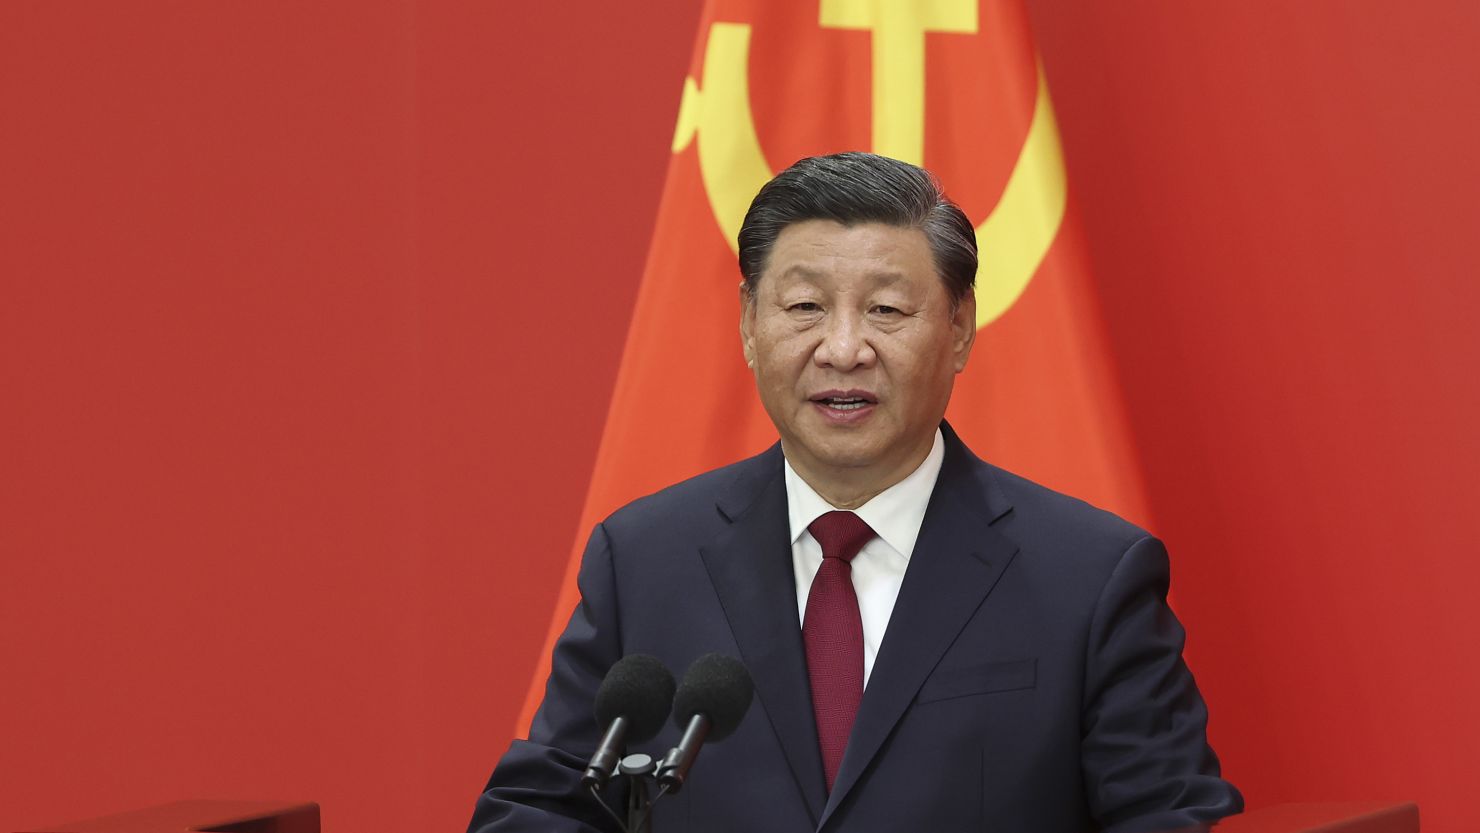 Chinese leader Xi Jinping speaks at the Communist Party's National Congress on October 23, 2022 in Beijing.